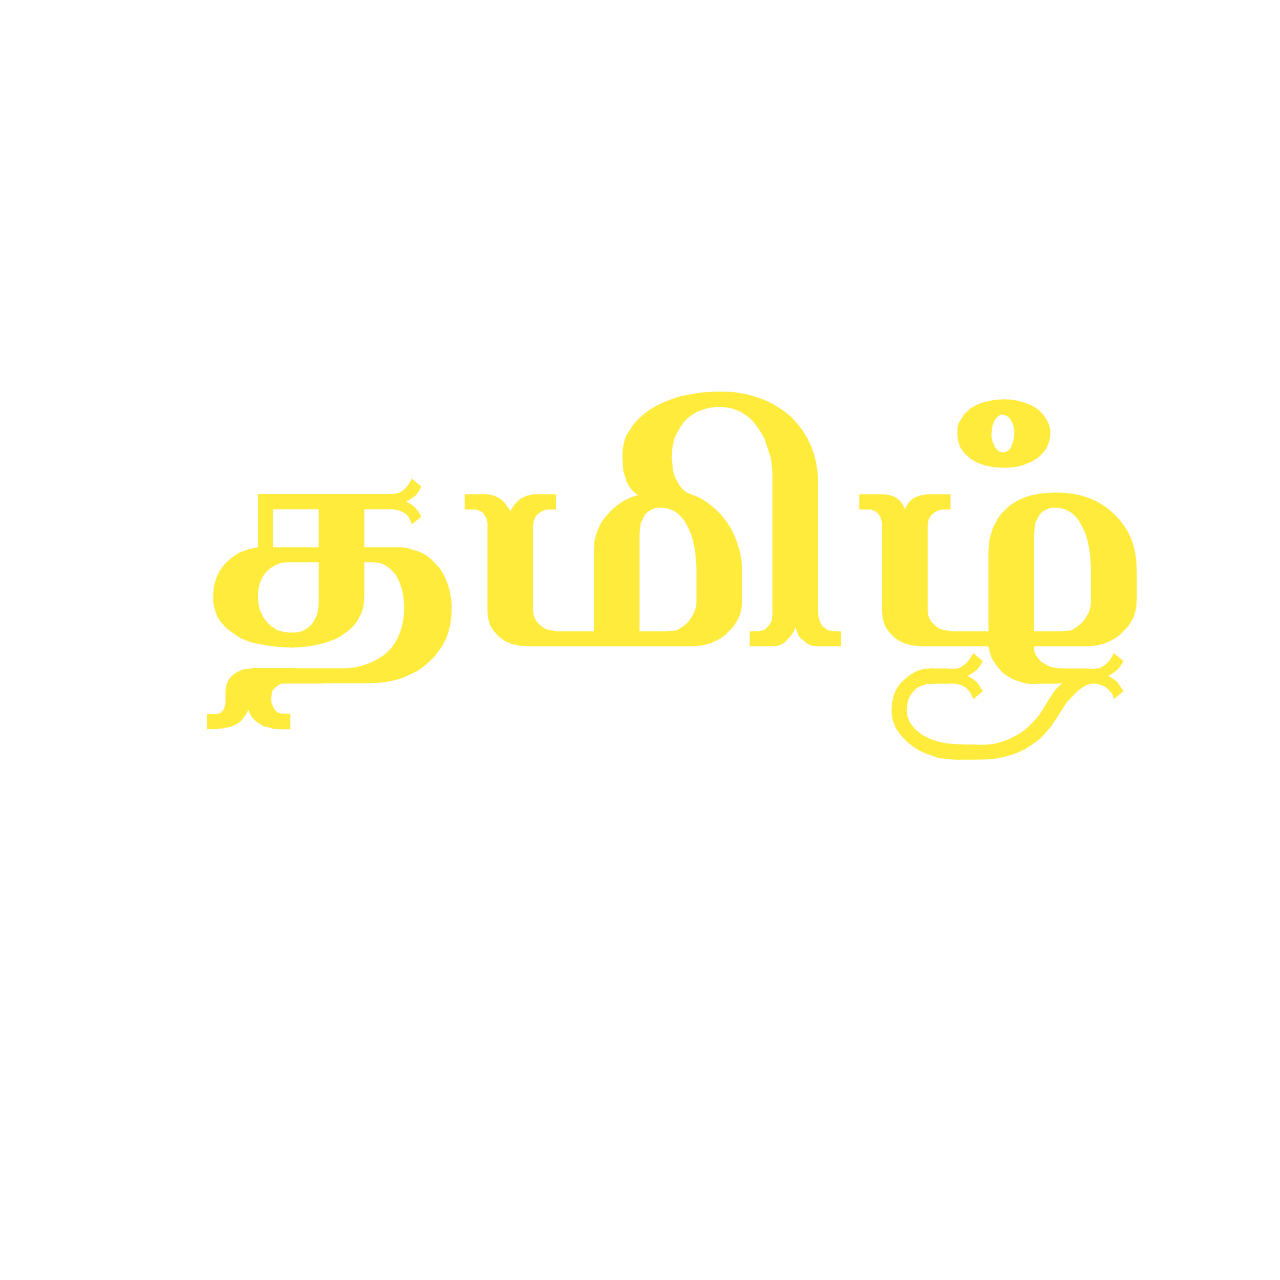 Download Tamil font ttf collection 23- download free tamil fonts ...